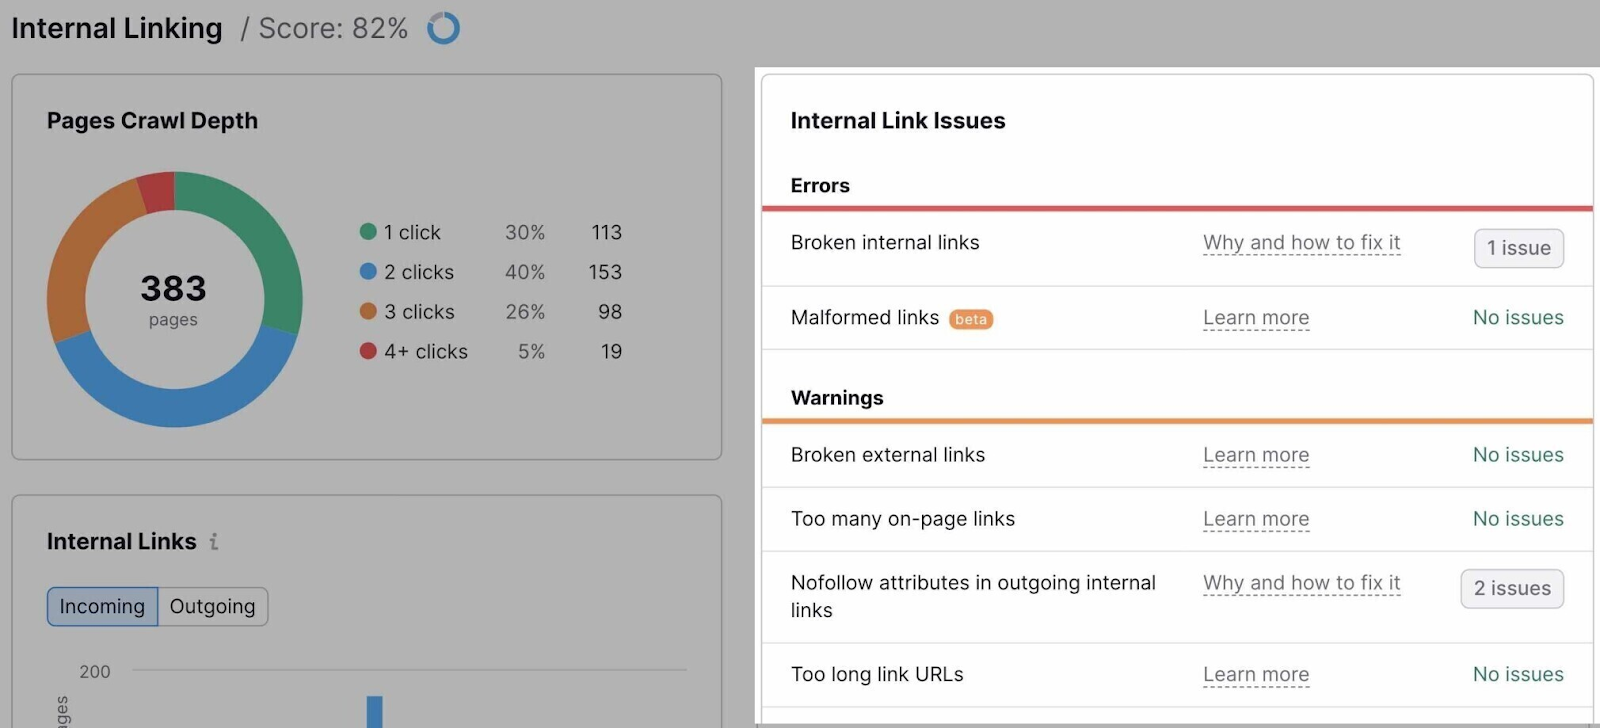 a list of issues related to internal linking